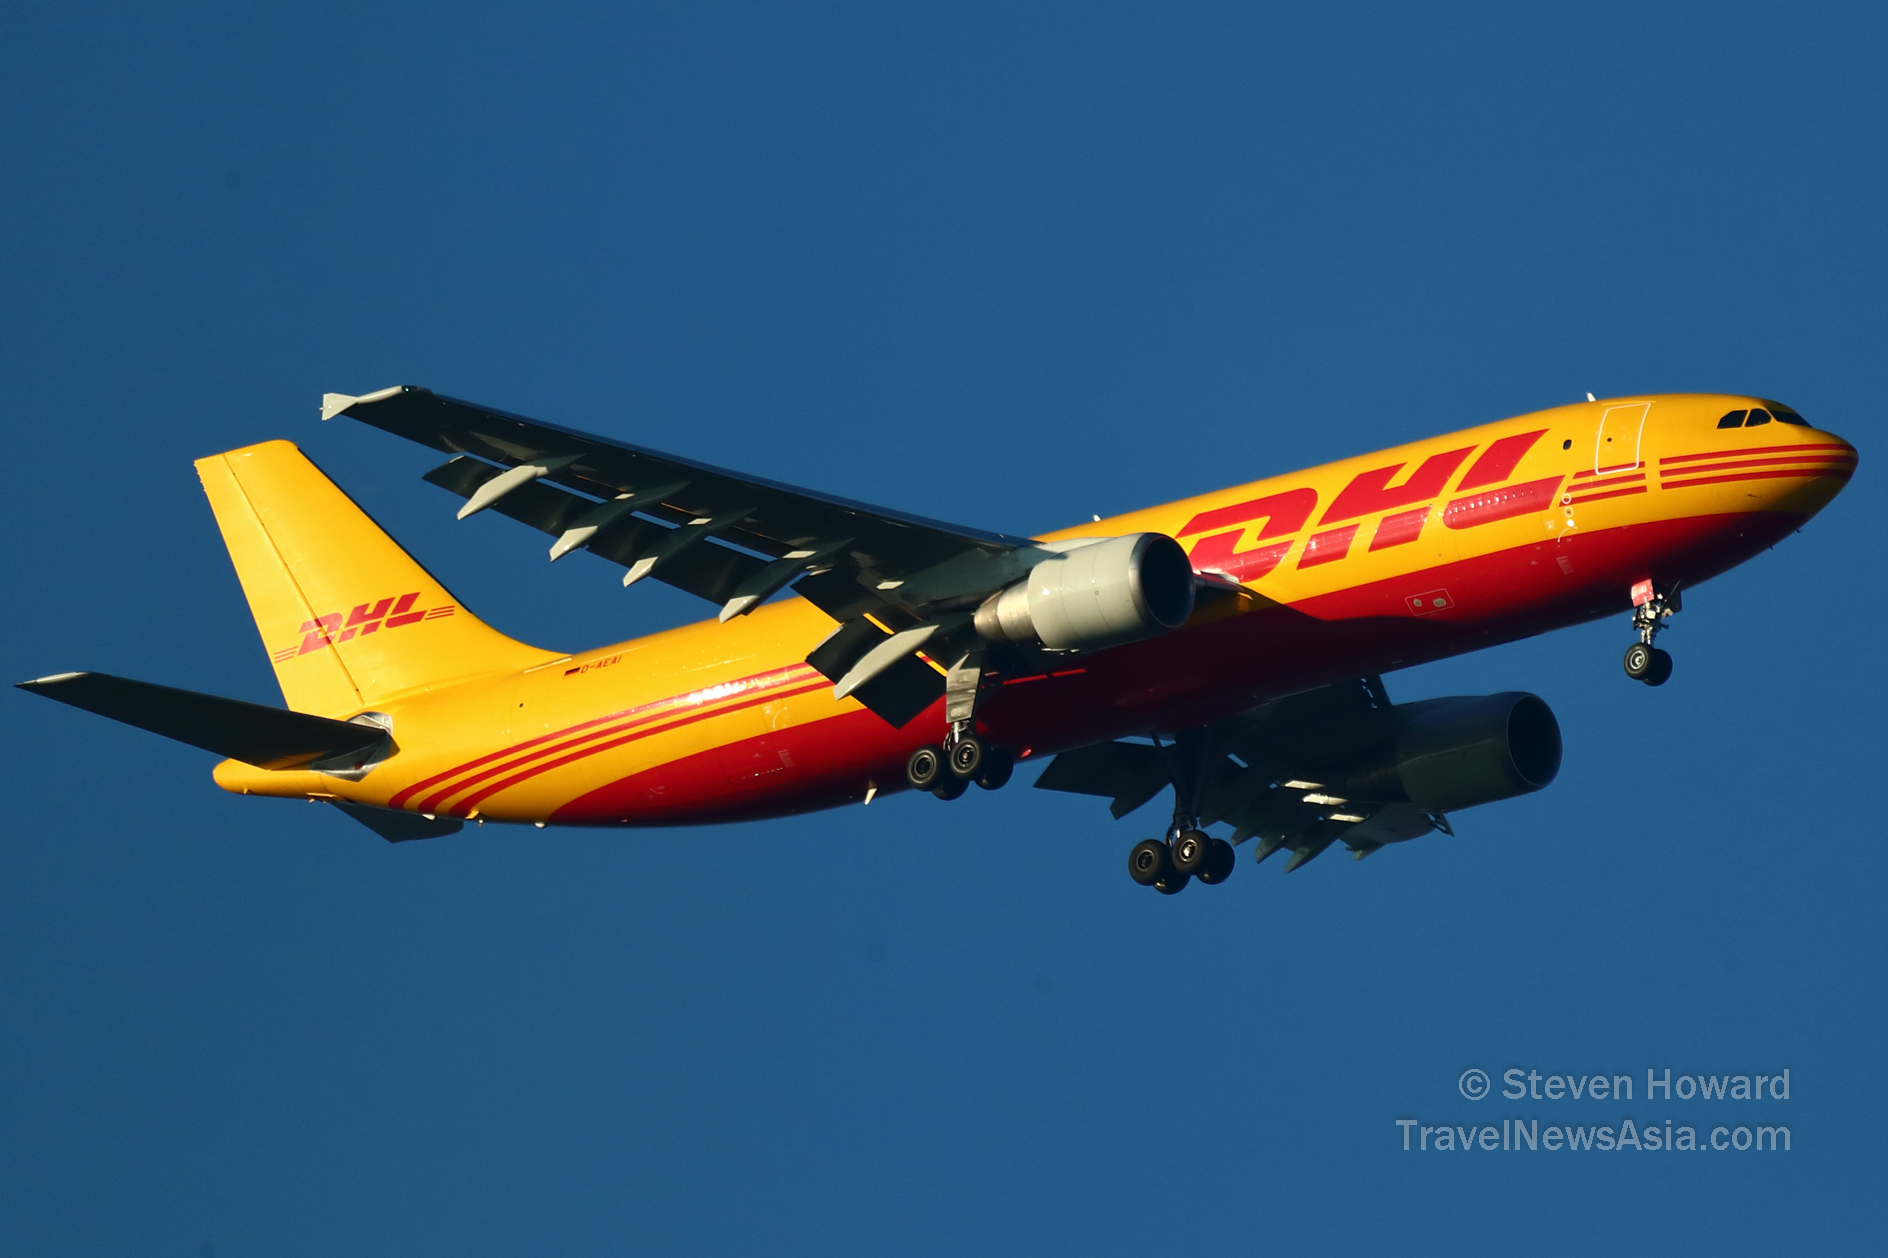 DHL Airbus A300 reg: D-AEAI. Picture by Steven Howard of TravelNewsAsia.com Click to enlarge.